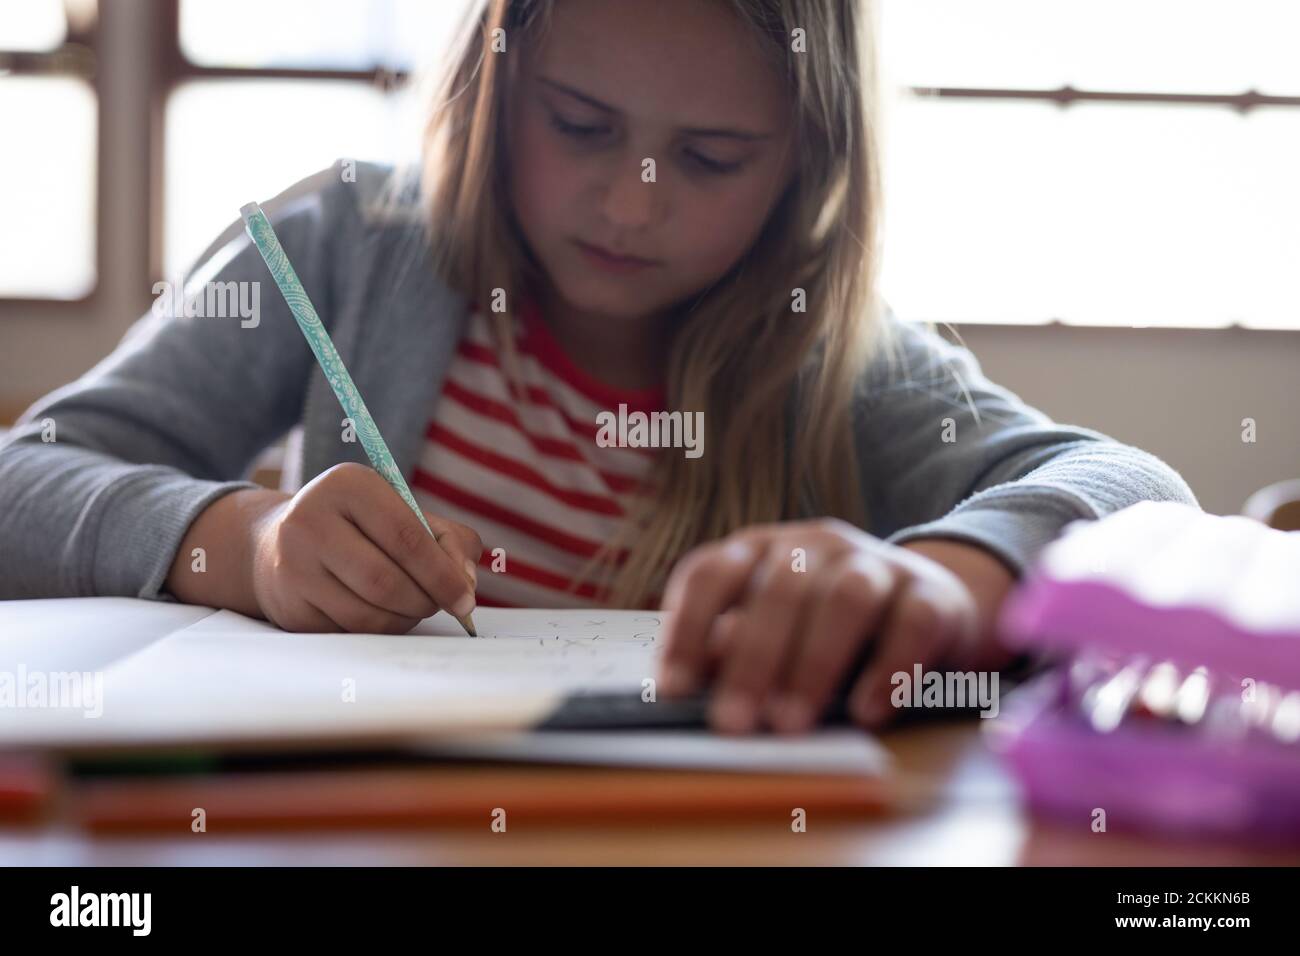 Girl writing in a book while sitting on her desk at school Stock Photo